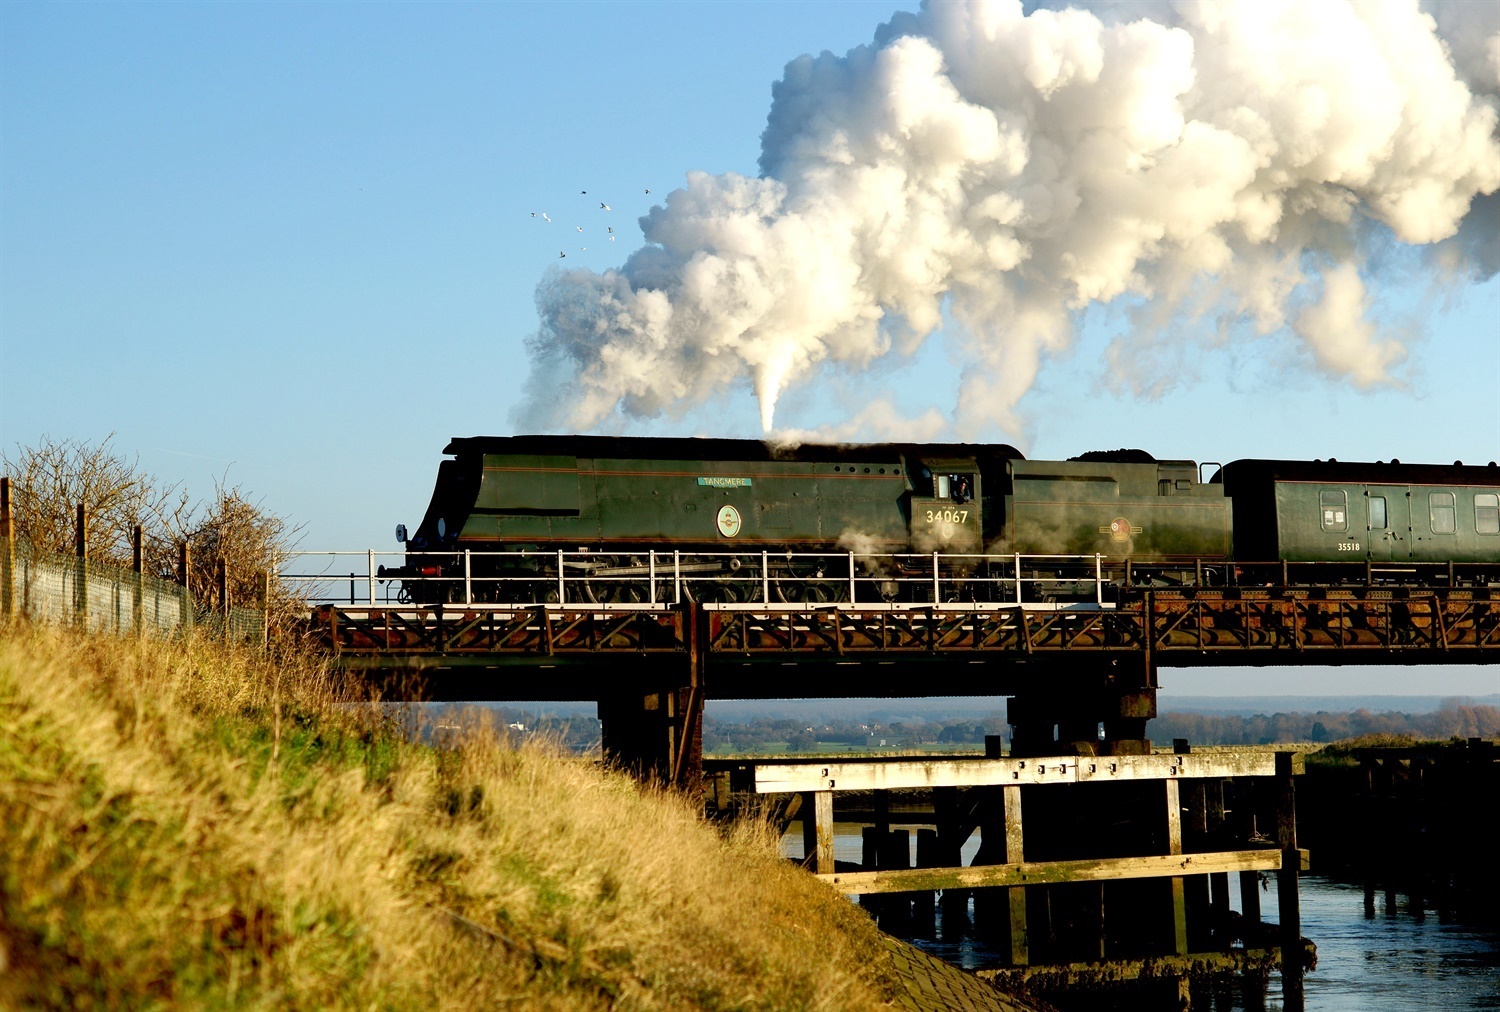 DfT offers £1m to heritage railways for tourism ideas